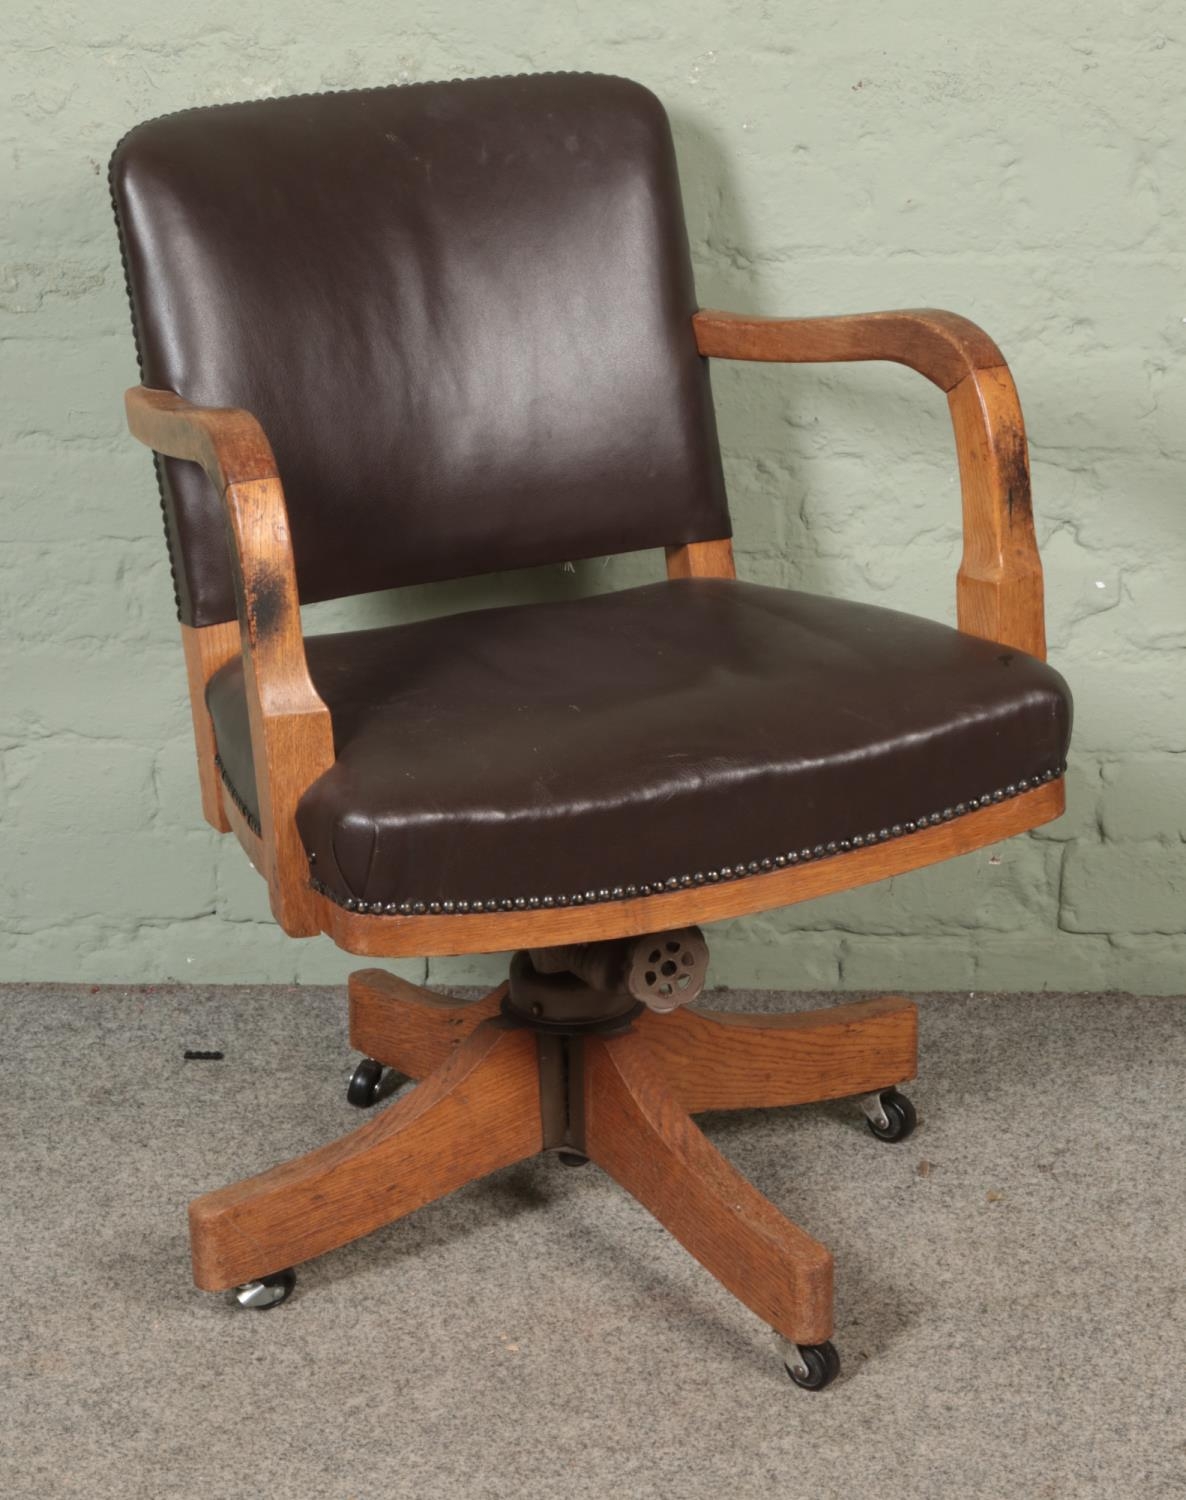 A mid 1940's Astrola office desk chair with leather upholstery